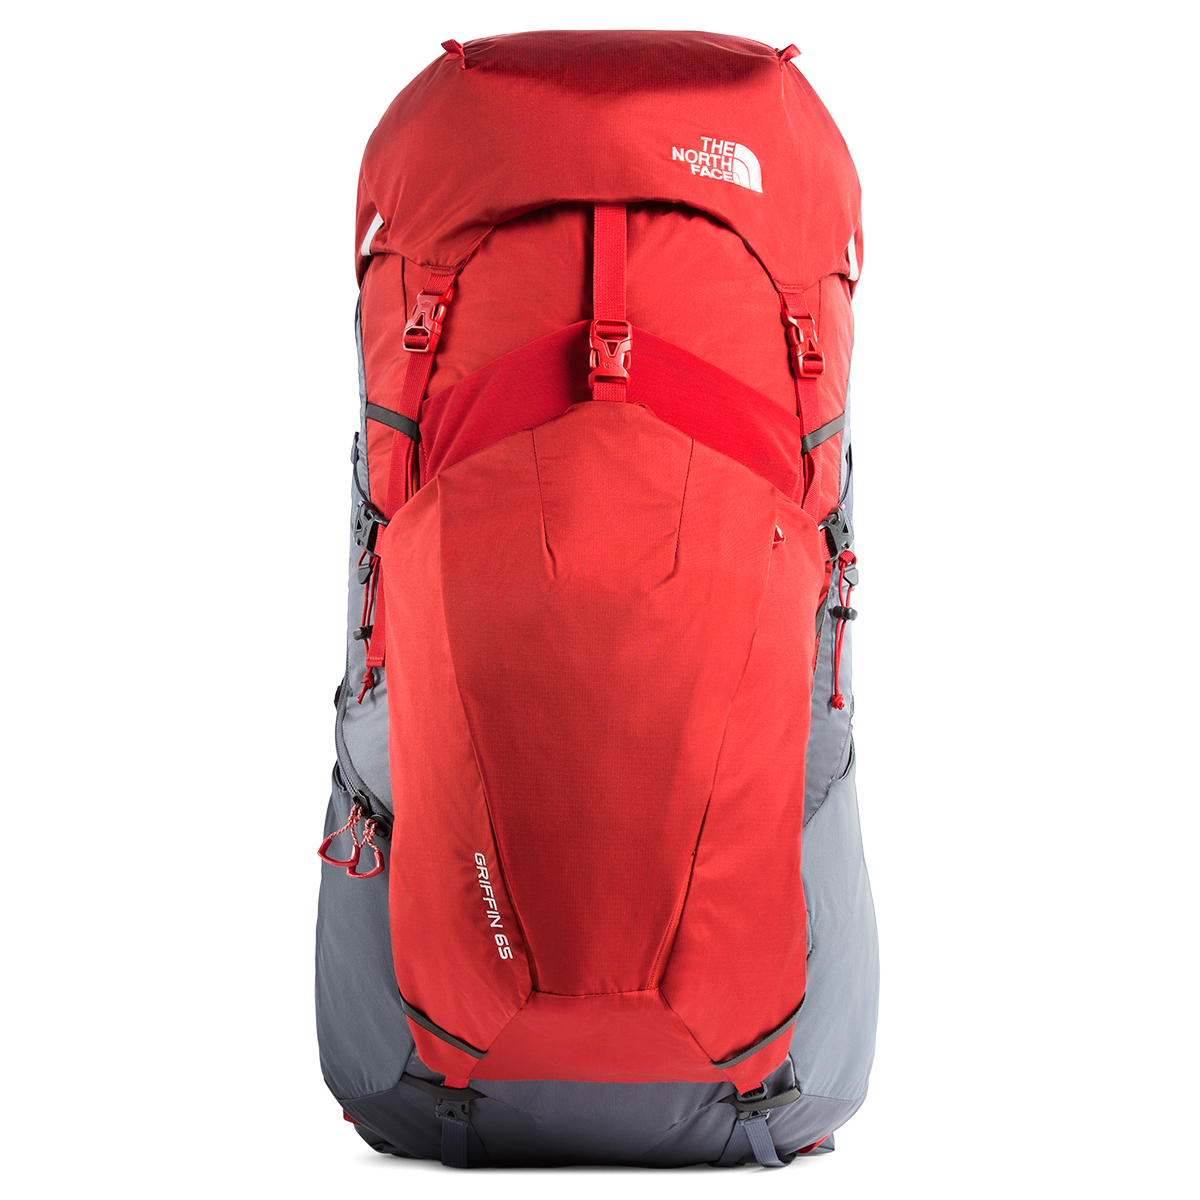 THE NORTH FACE Women's Griffin 65 Backpack - Eastern 